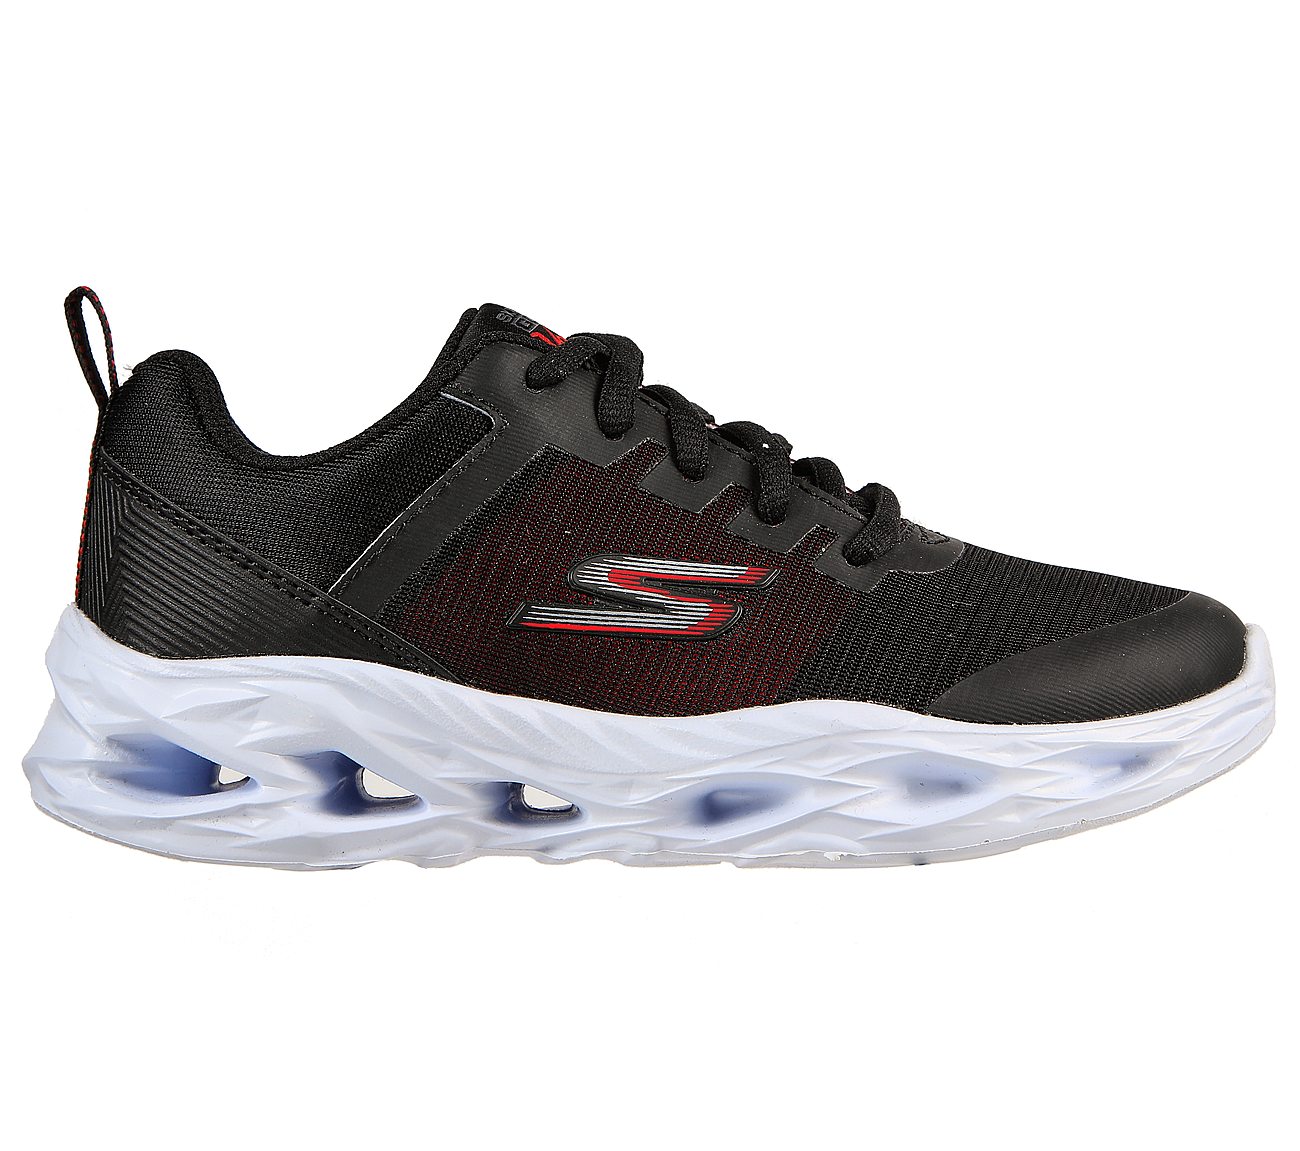 Skechers Black/Red Go Run Storm Shoes For Boys Style ID: 405001L |